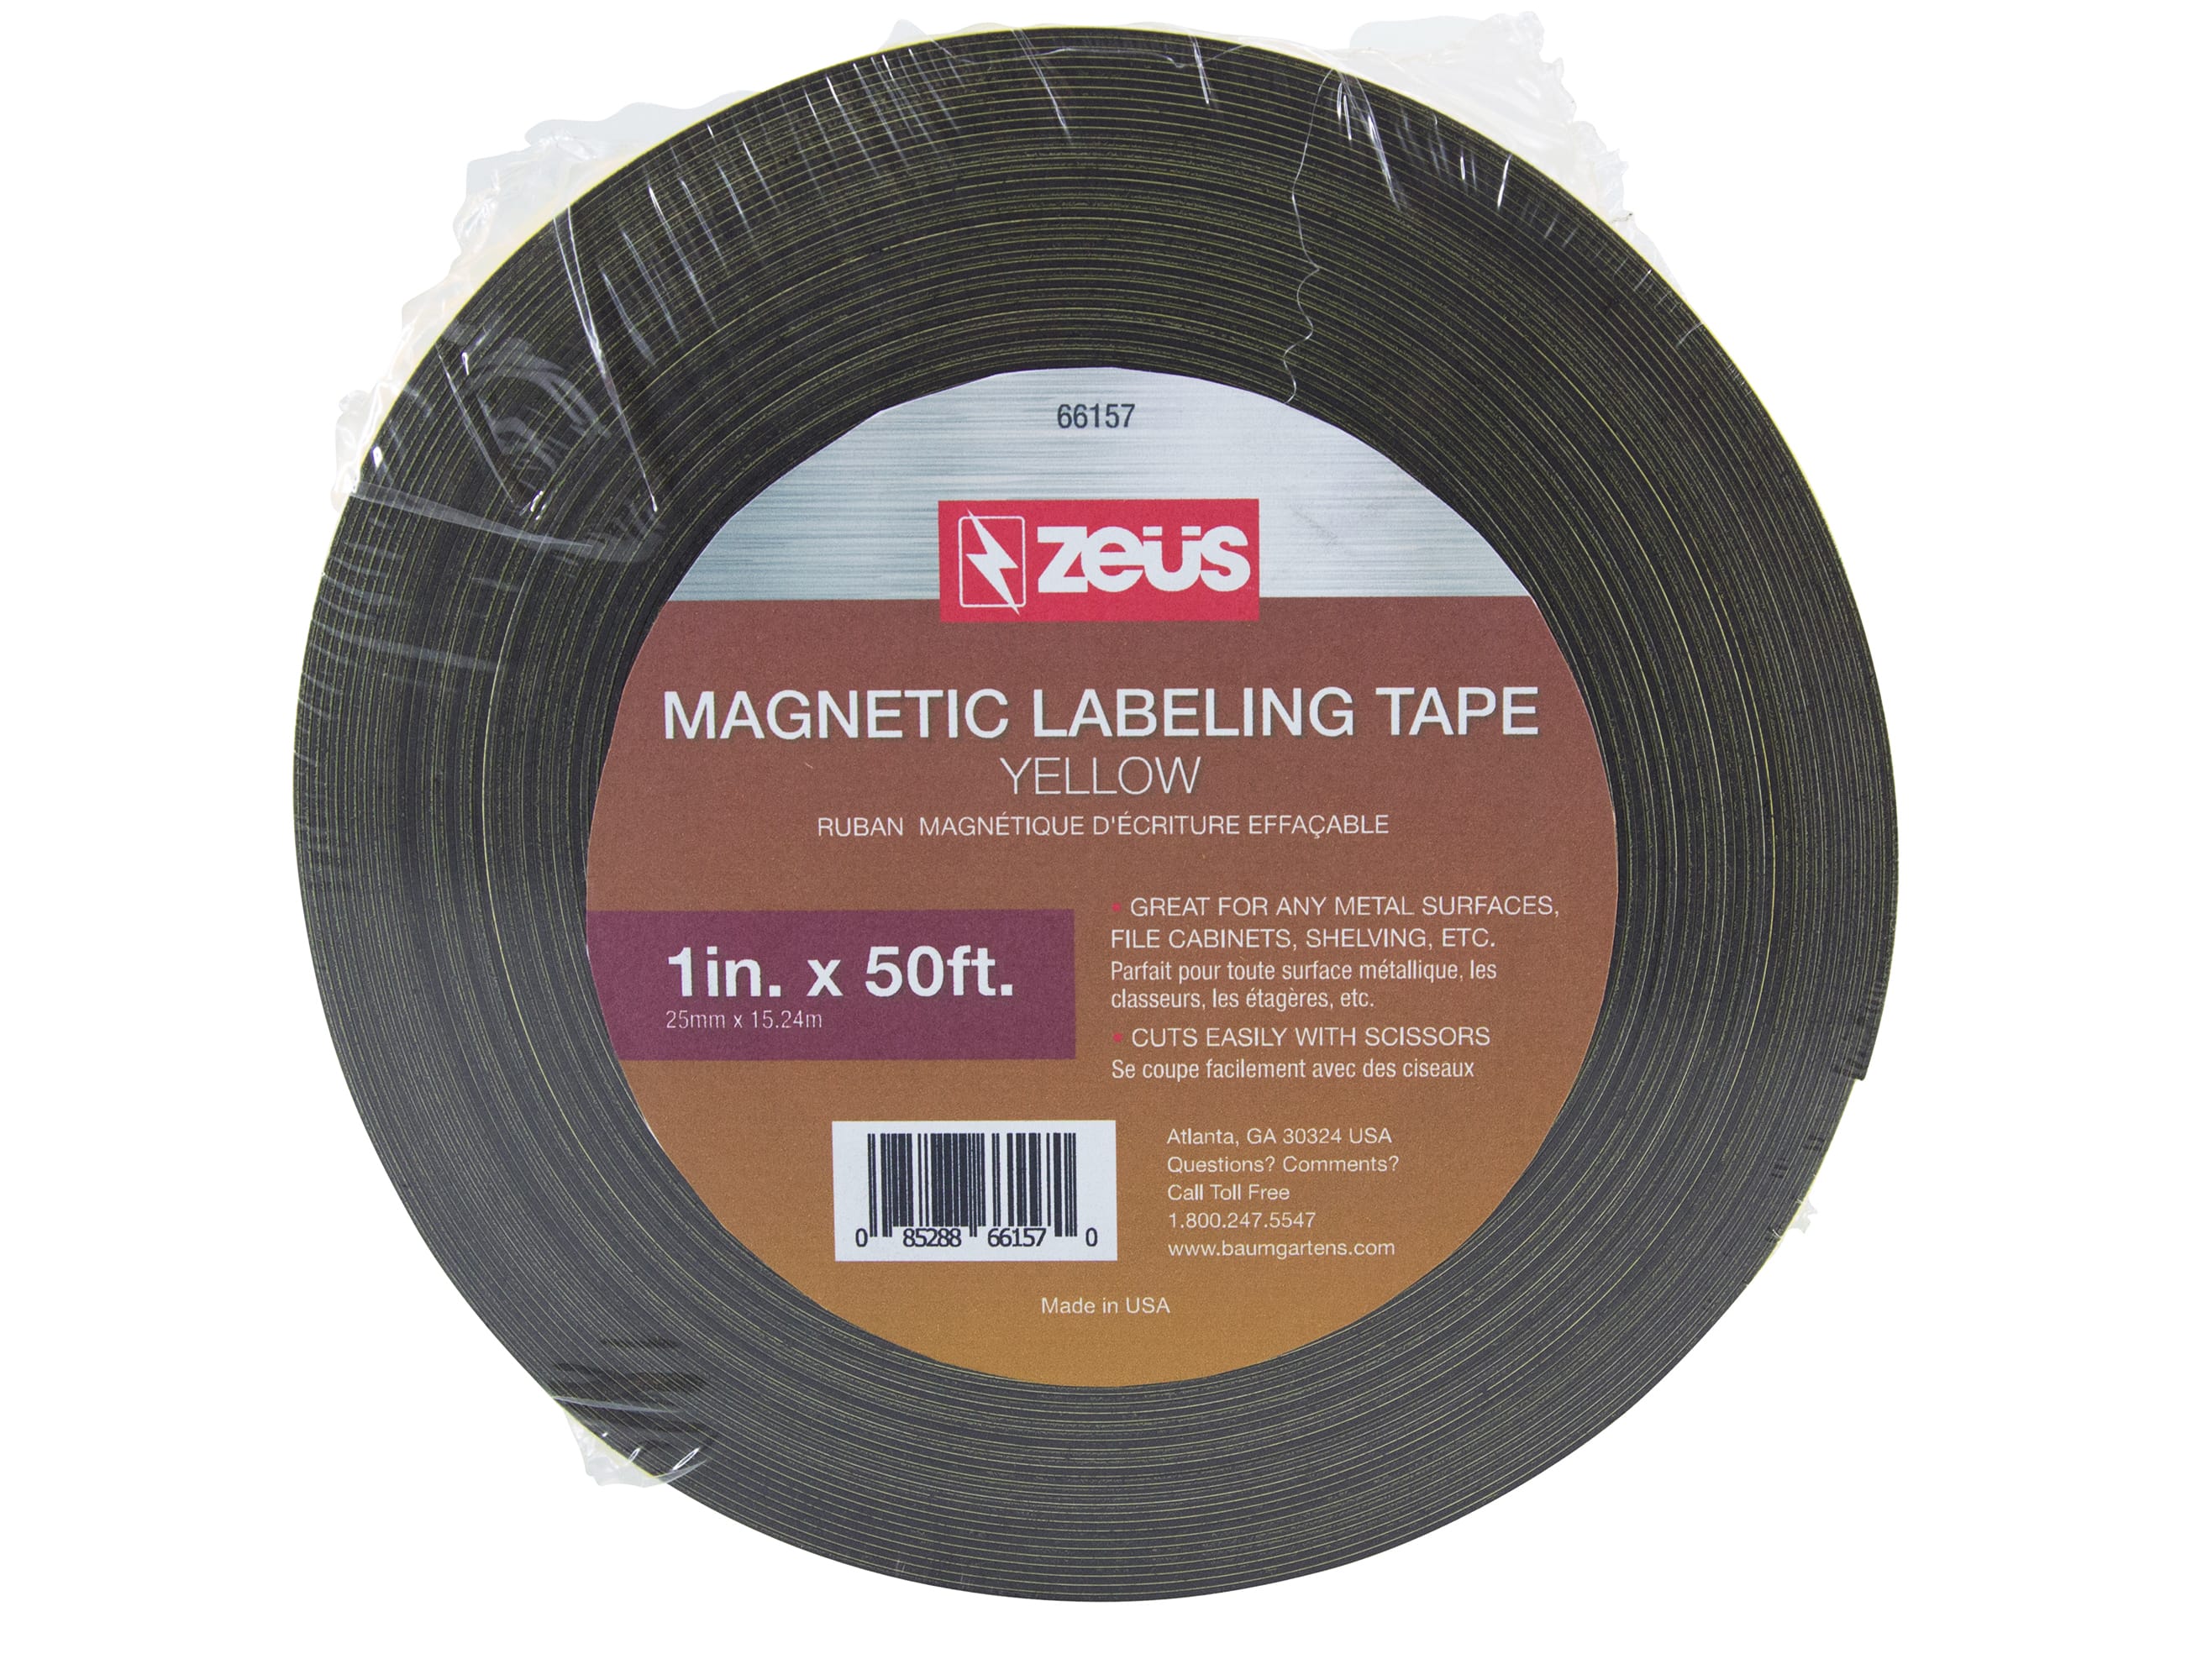 Zeüs Magnetic Label Tape Industrial Durable Self-Adhesive Flexible Roll Refill 50' YELLOW (66157)